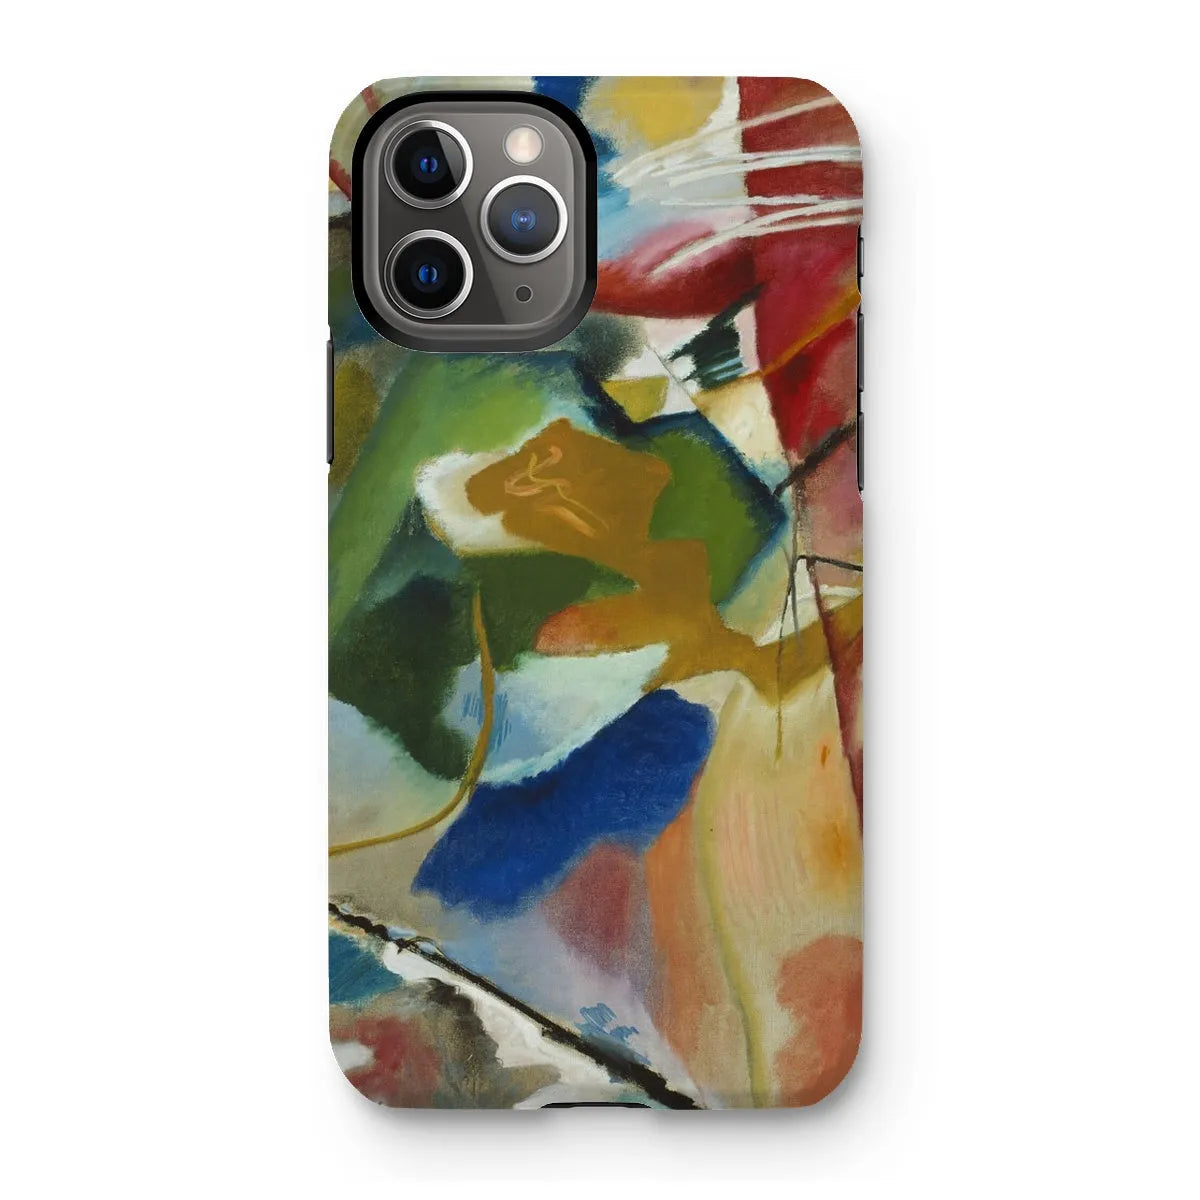 Painting With Green Center Art Phone Case - Wassily Kandinsky - Iphone 11 Pro / Matte - Mobile Phone Cases - Aesthetic